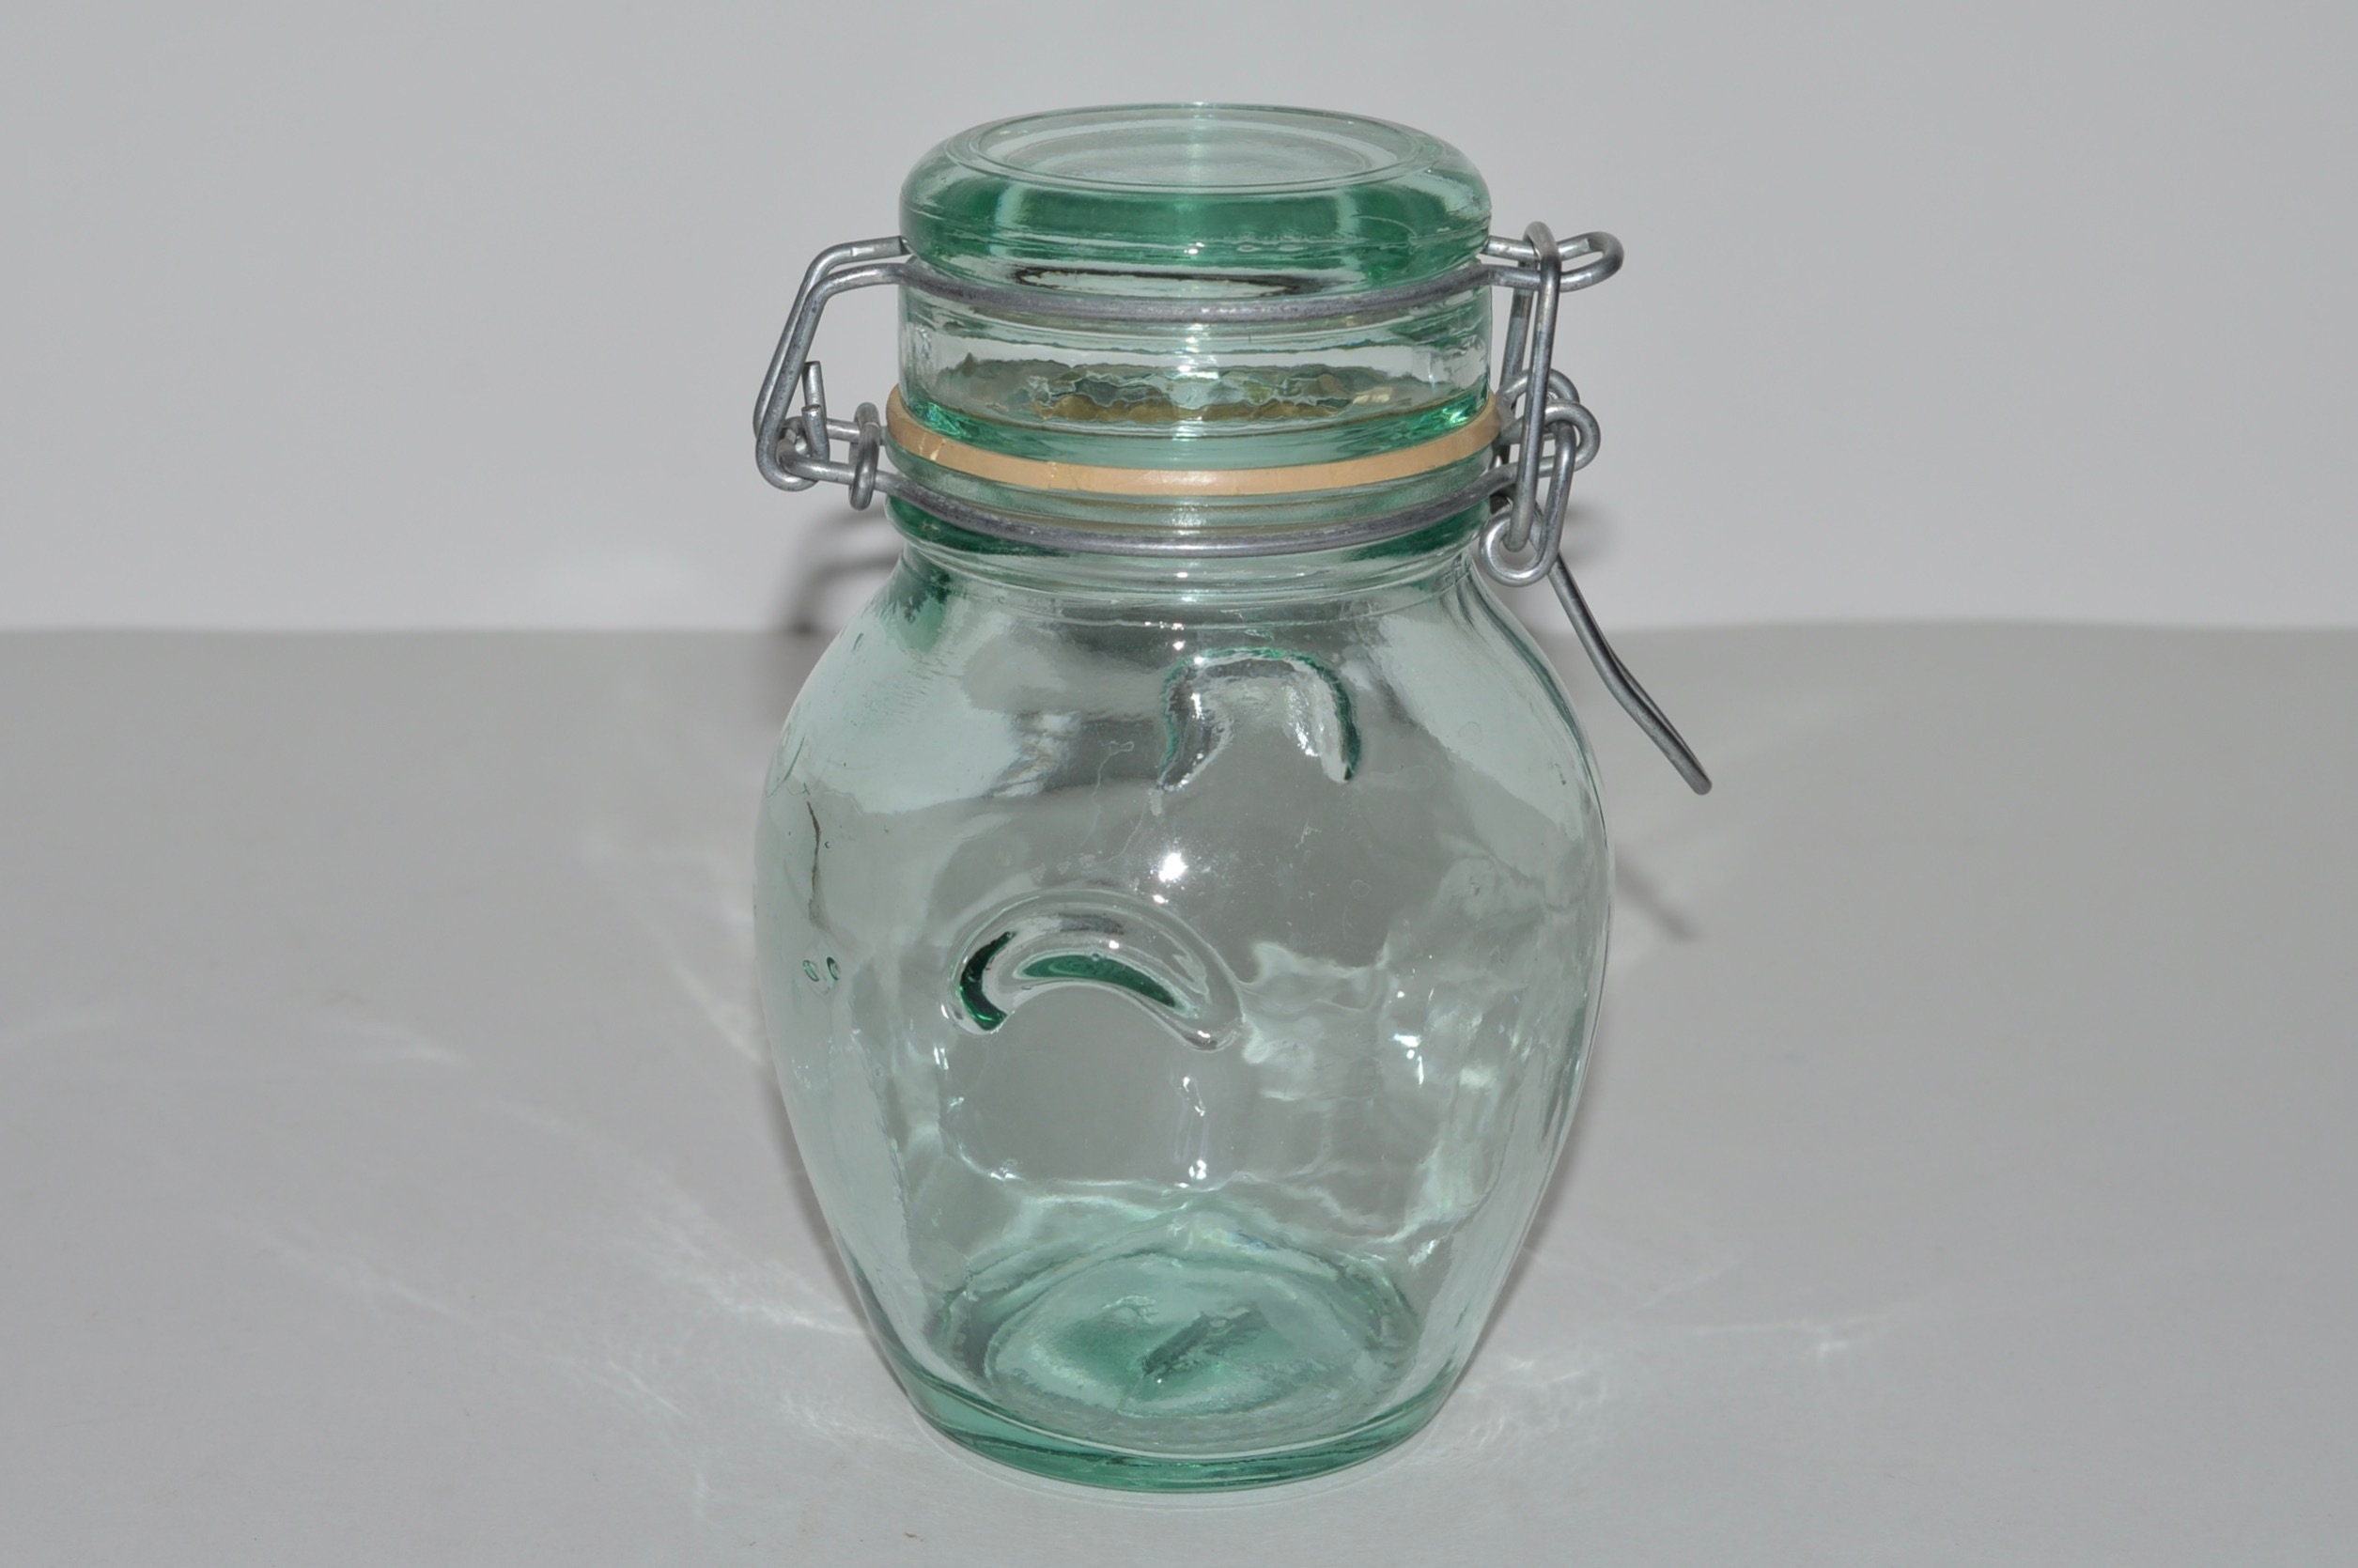 Glass Jars with Wood Lids - Essos Home and Kitchen